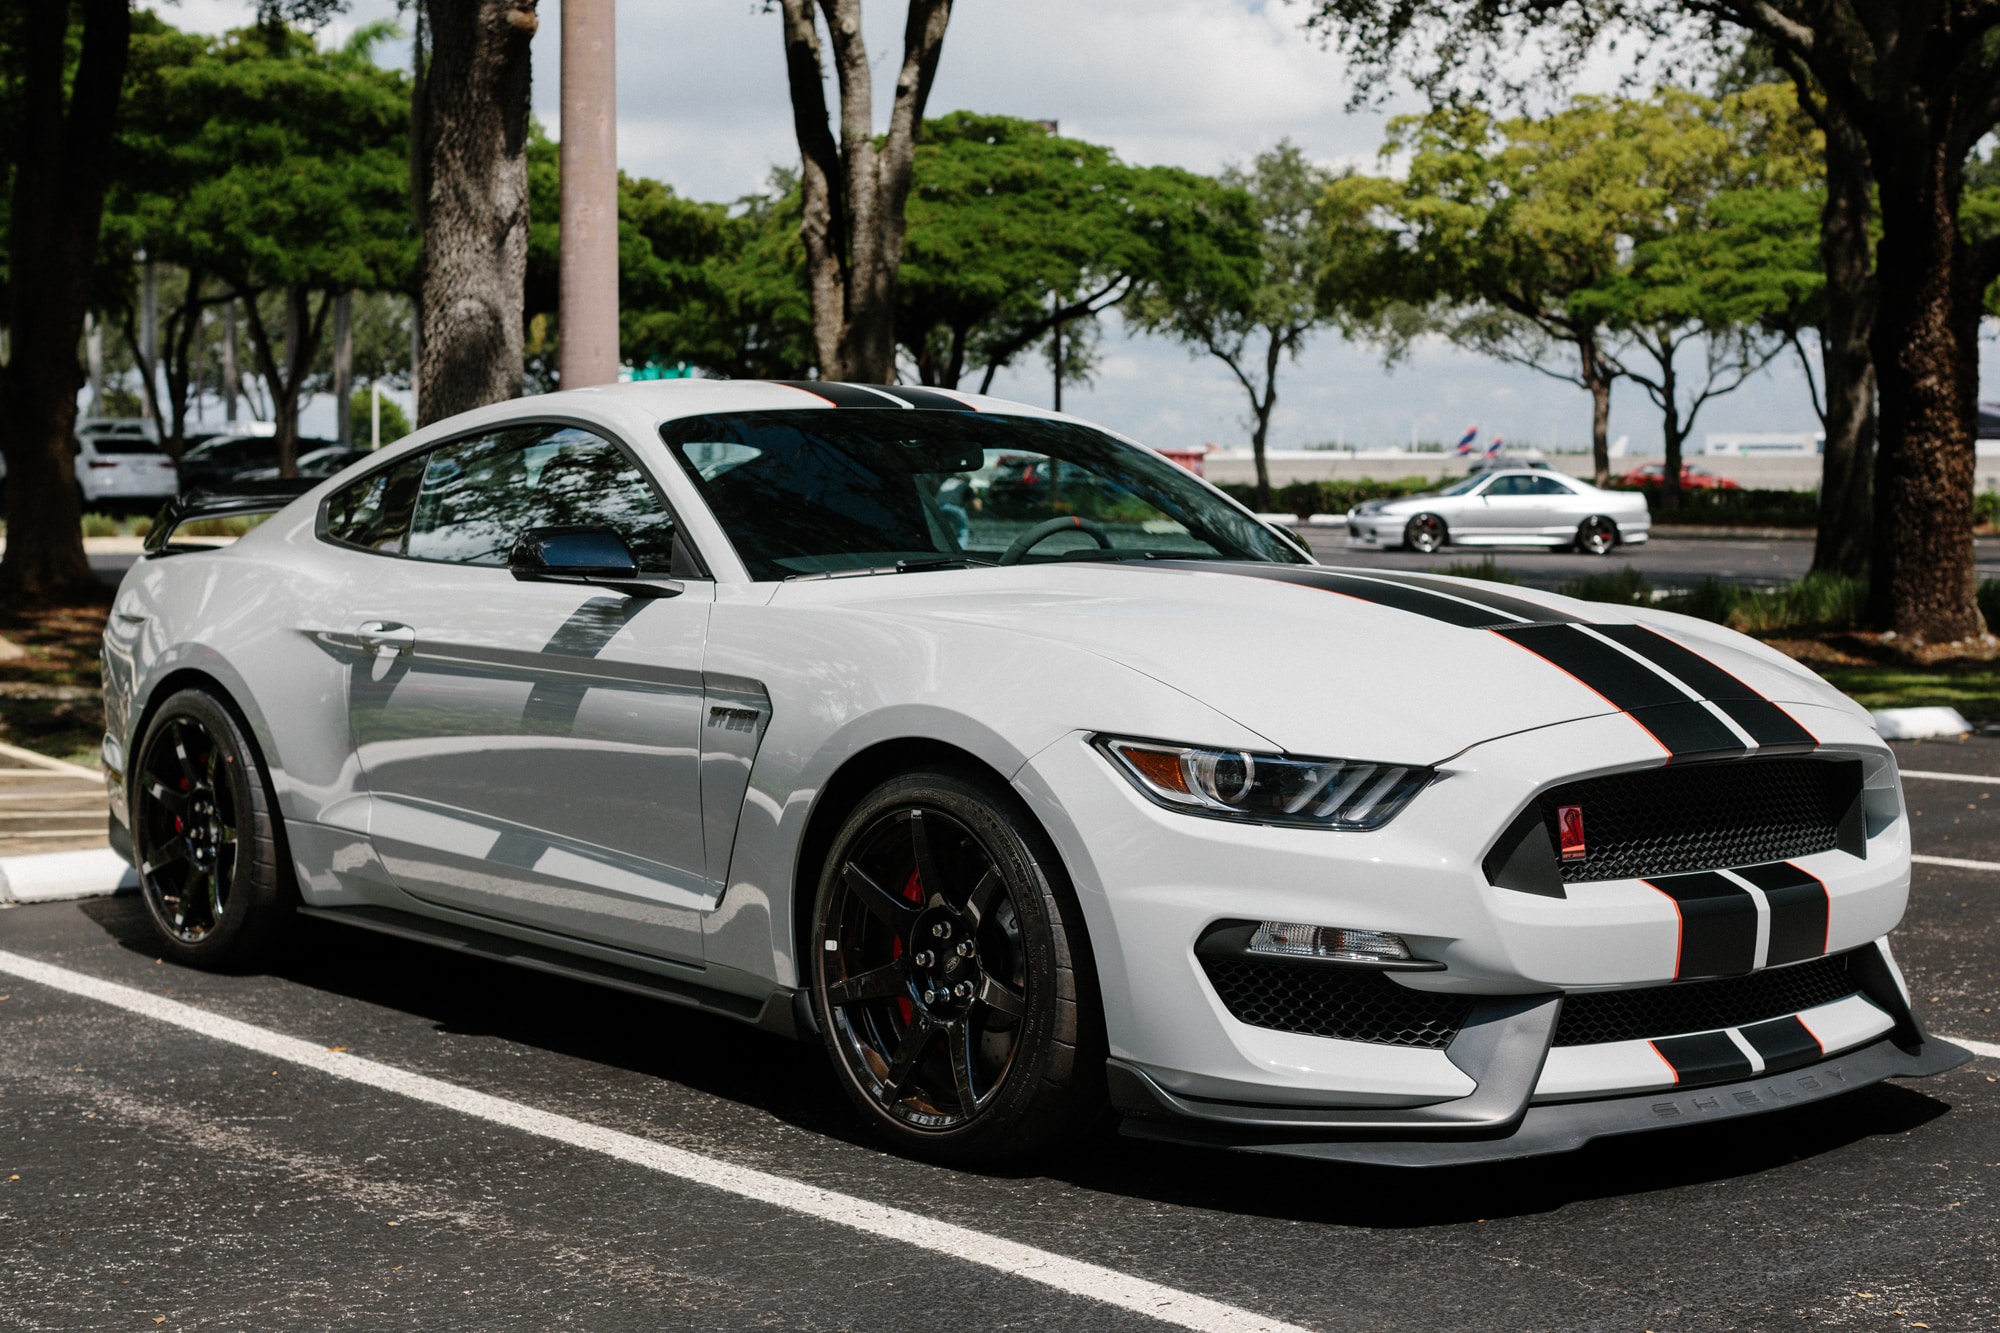 2016 Ford Shelby GT350R (S-197 II) | 1 of 172 in Avalanche Gray | Flat-Plane V8 | Carbon Fiber Wheels | 6-Speed Manual | Factory Recaros | Brembo BBK